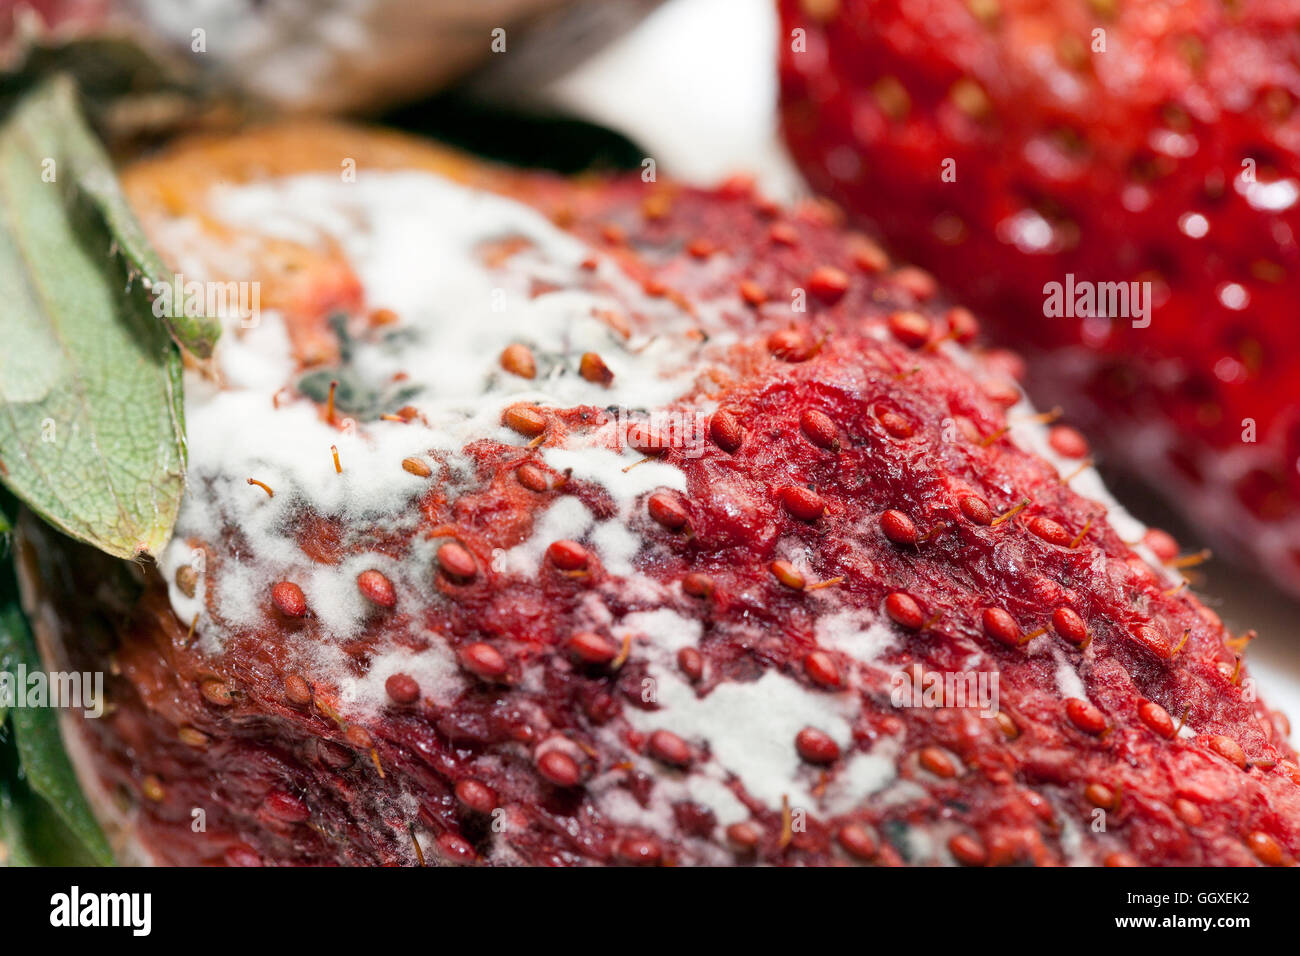 Strawberry with mold Stock Photo